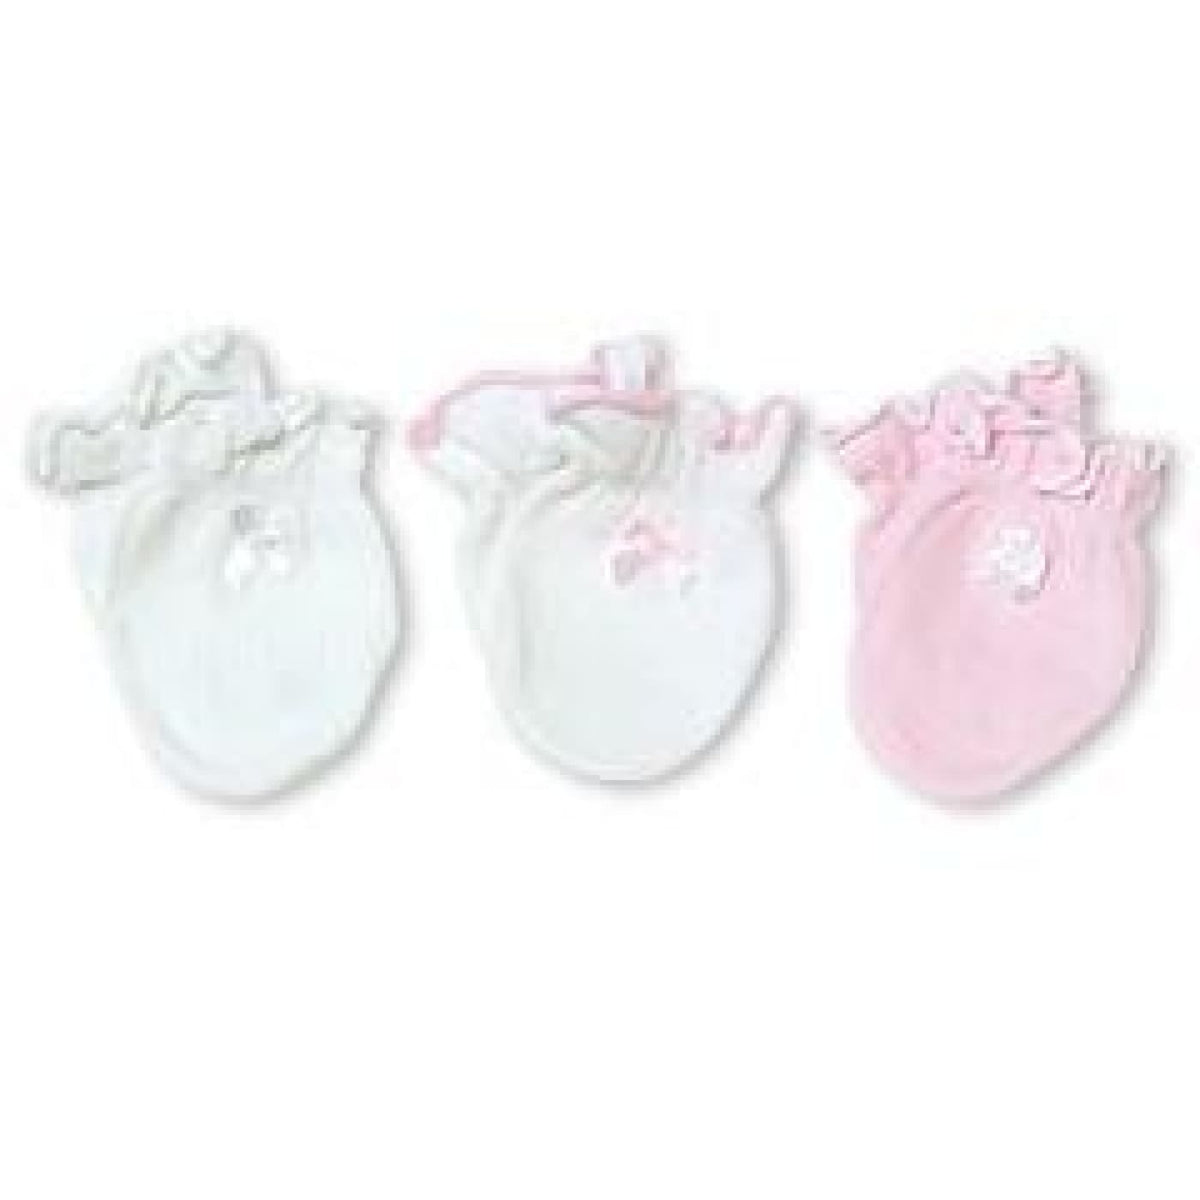 Playette Preemie Mittens - Pink/White 3PK - Prem / Pink/White - BABY &amp; TODDLER CLOTHING - MITTENS/SOCKS/SHOES